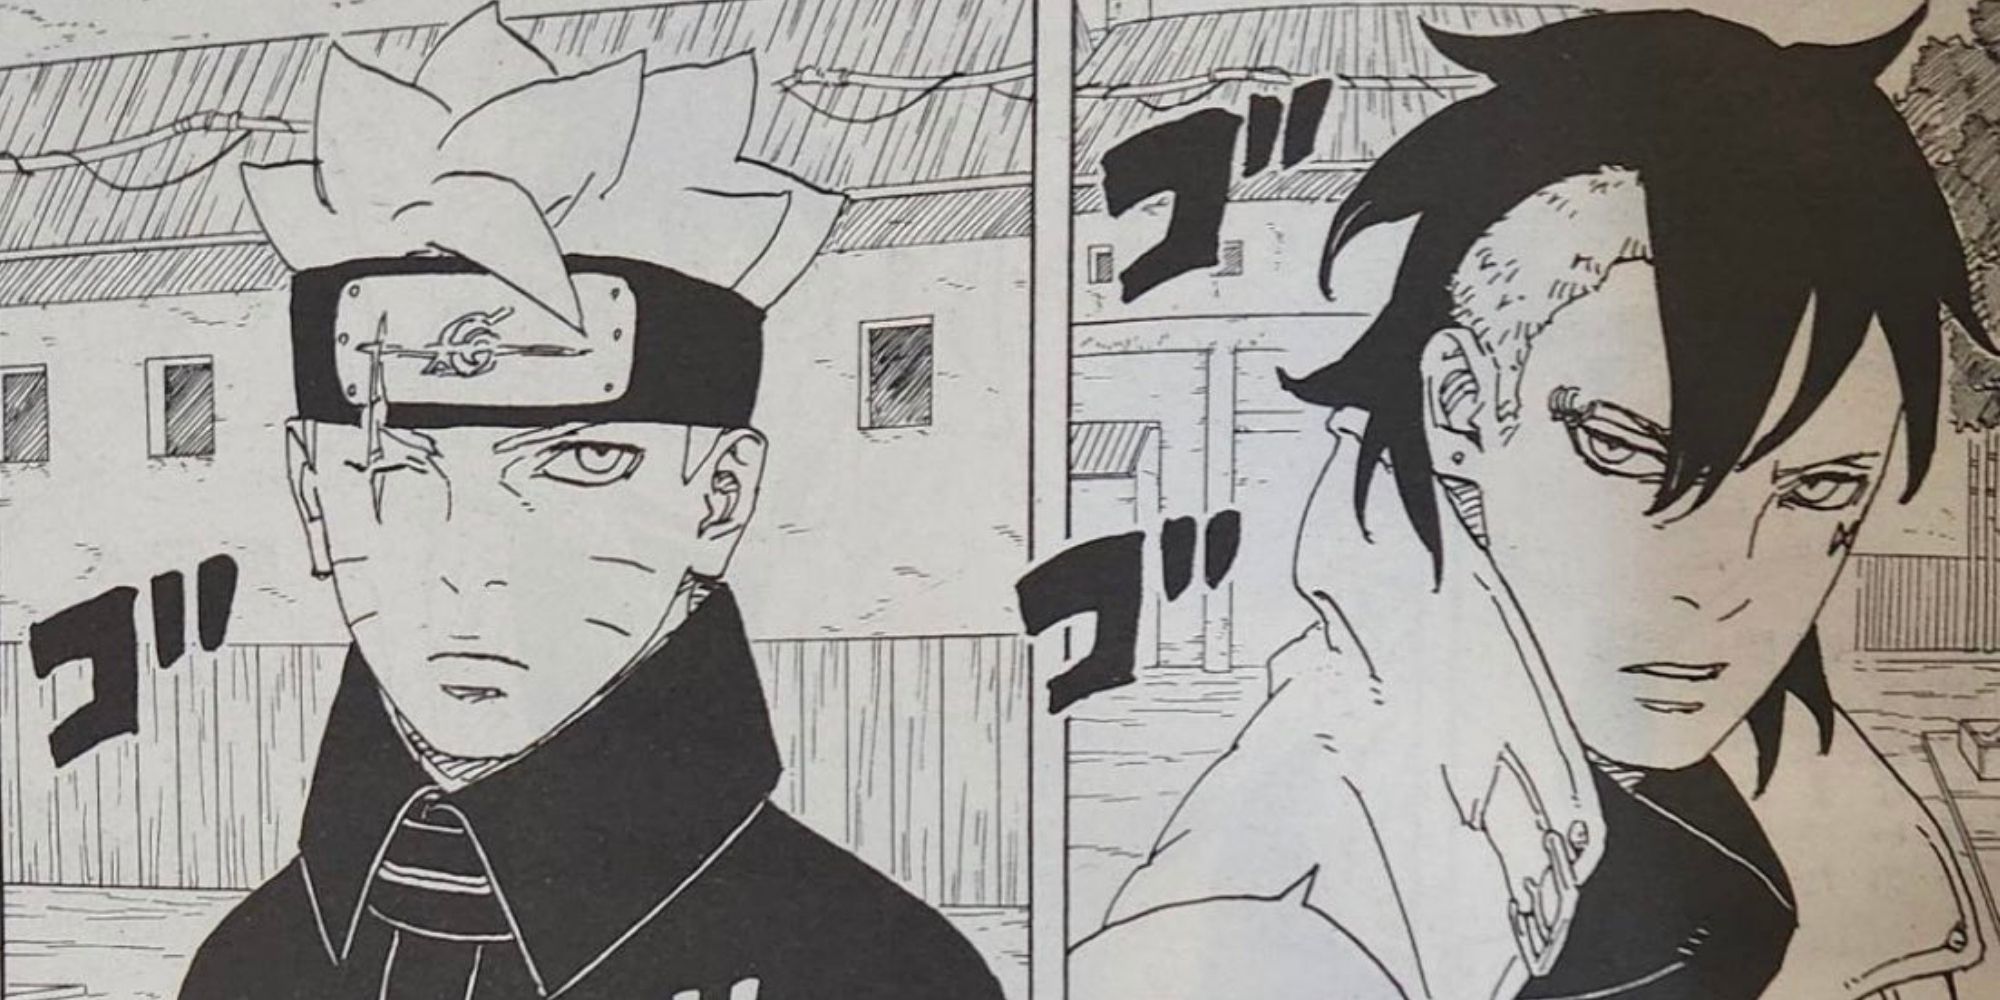 Boruto Two Blue Vortex Chapter 2 Release Date: Where We Can Read